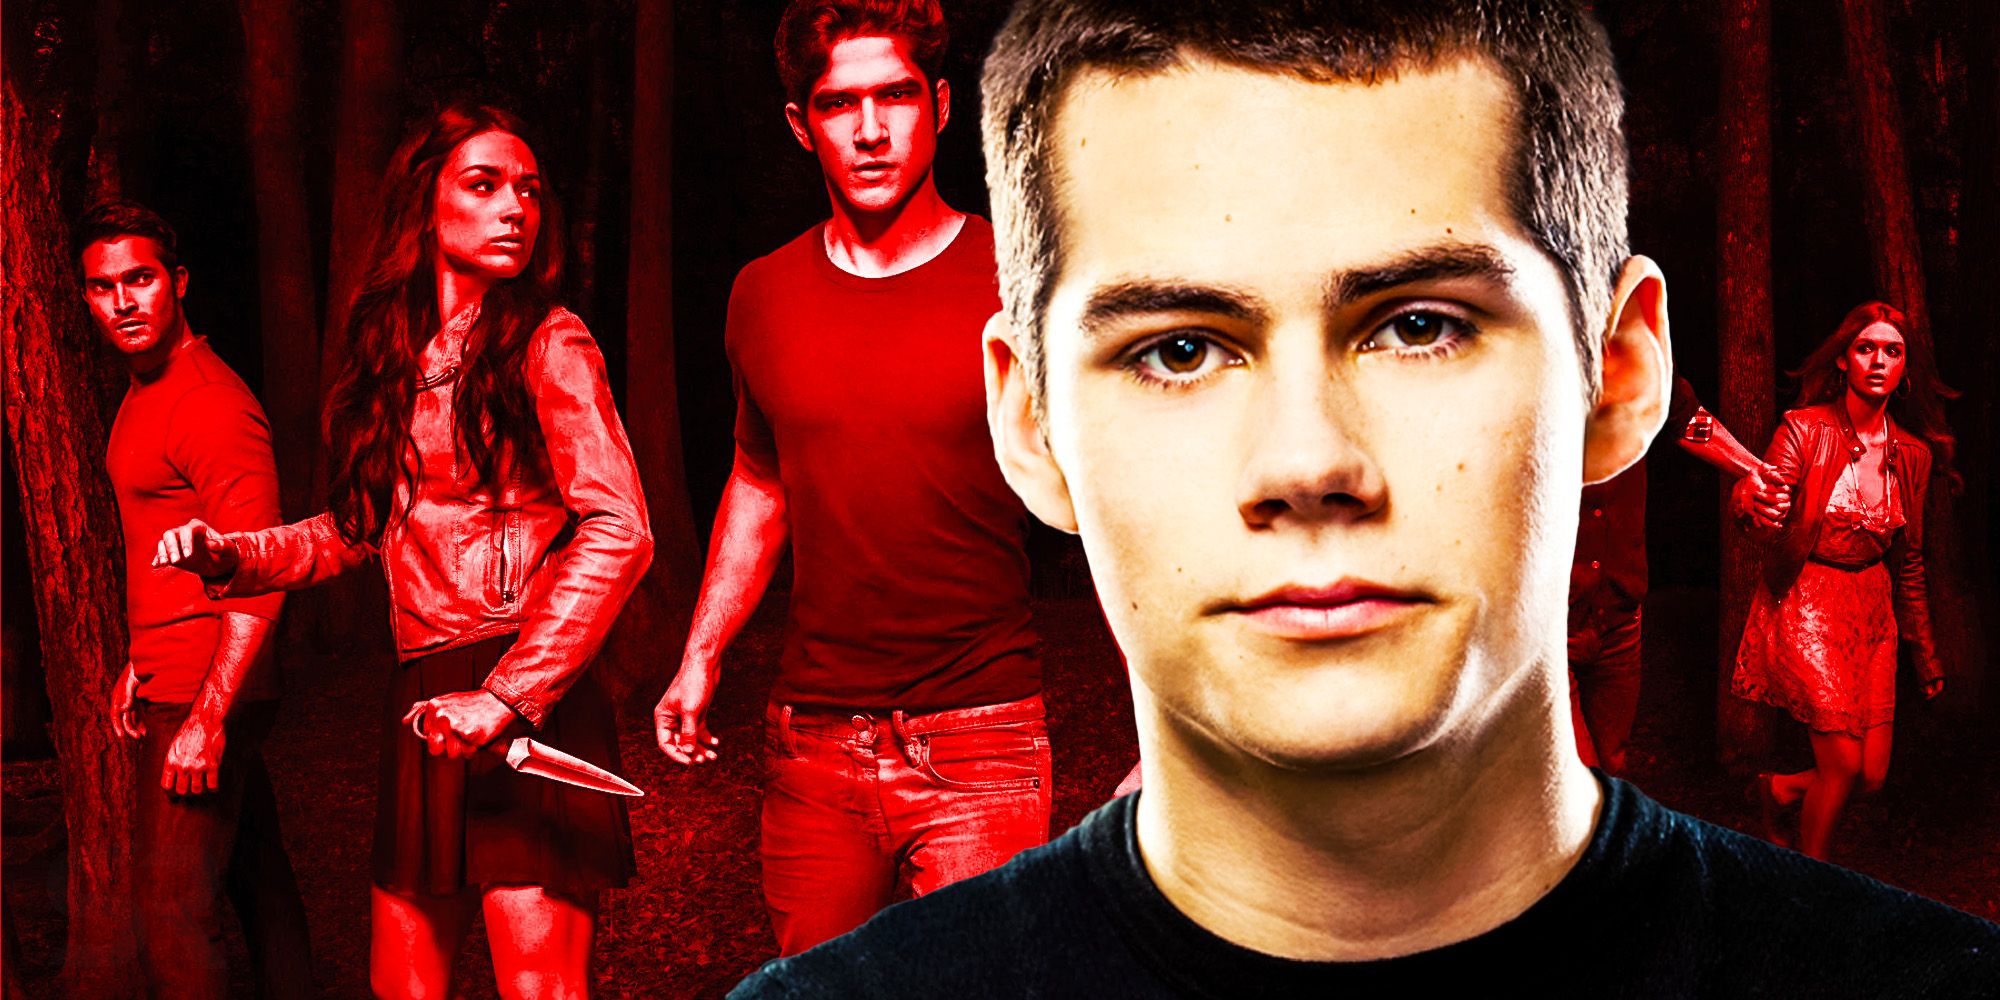 Teen Wolf star Dylan O'Brien addresses absence from movie